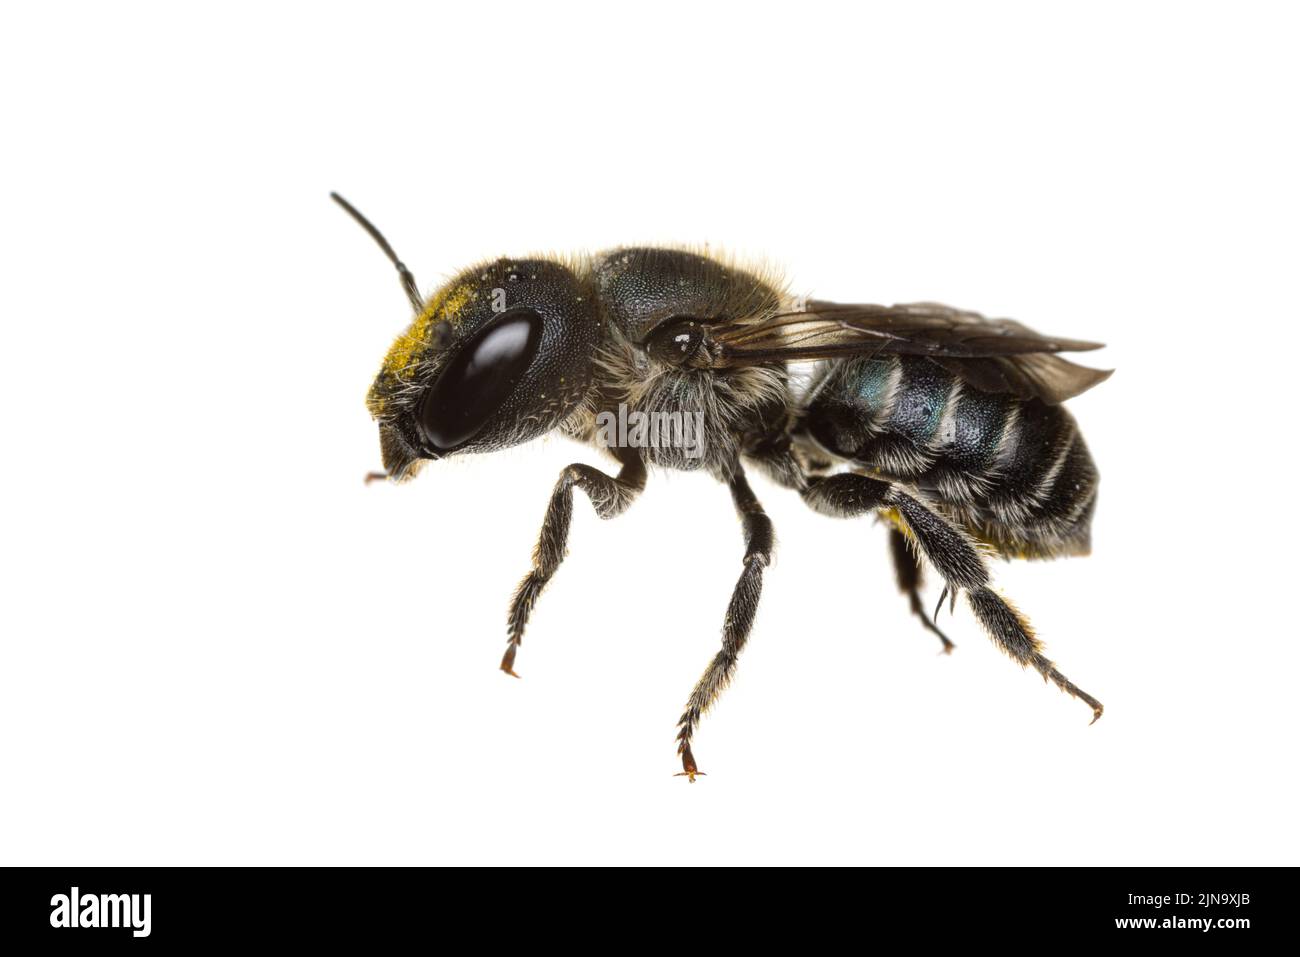 insects of europe - bees: side view of female Osmia caerulescens blue mason bee  (german Stahlblaue Mauerbiene)  isolated on white background Stock Photo